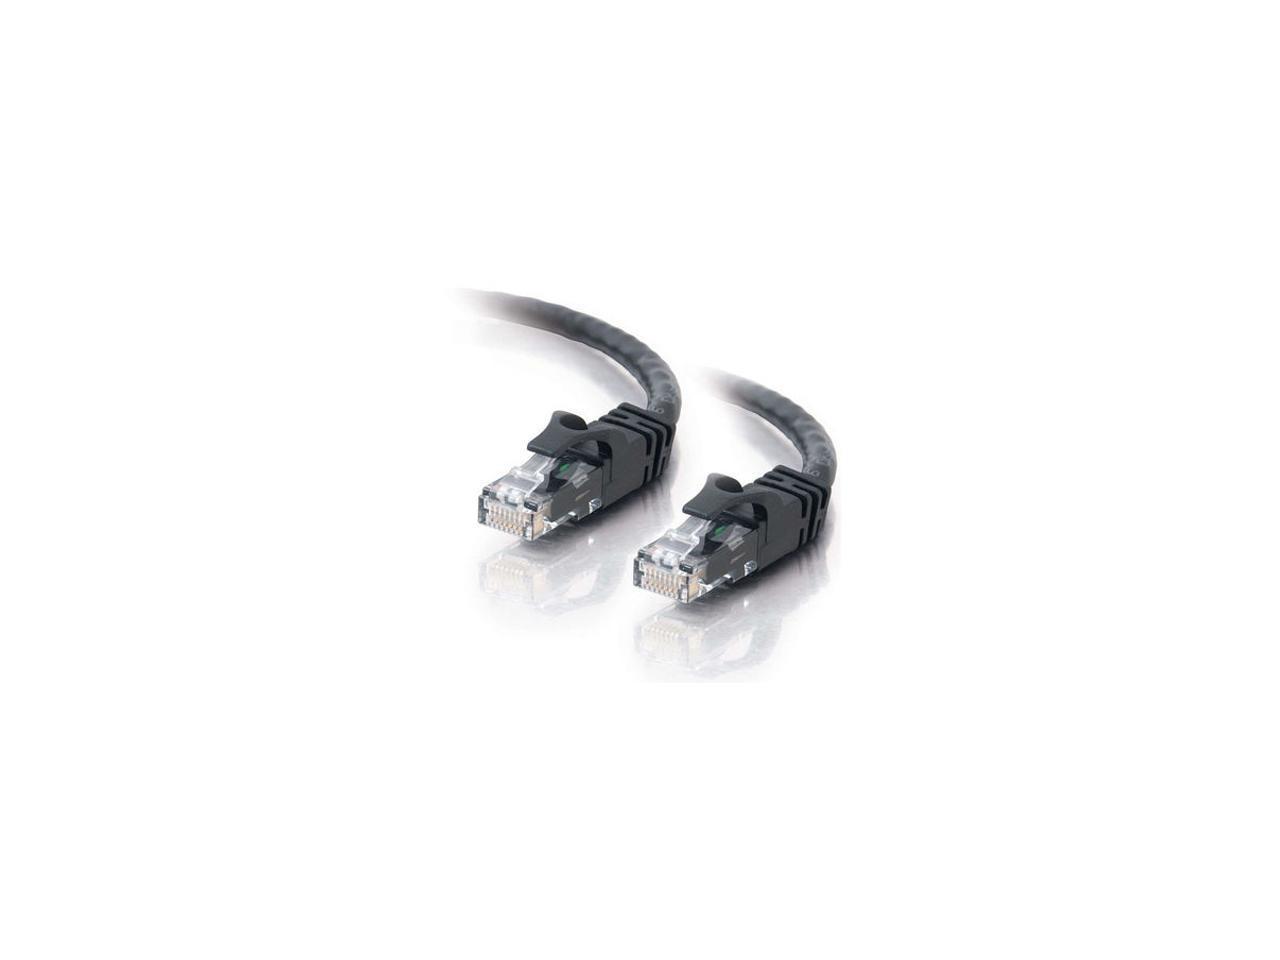 Black Snagless Unshielded Ethernet Network Patch Cable C2G 31352 Cat6 Cable 35 Feet, 10.66 Meters 